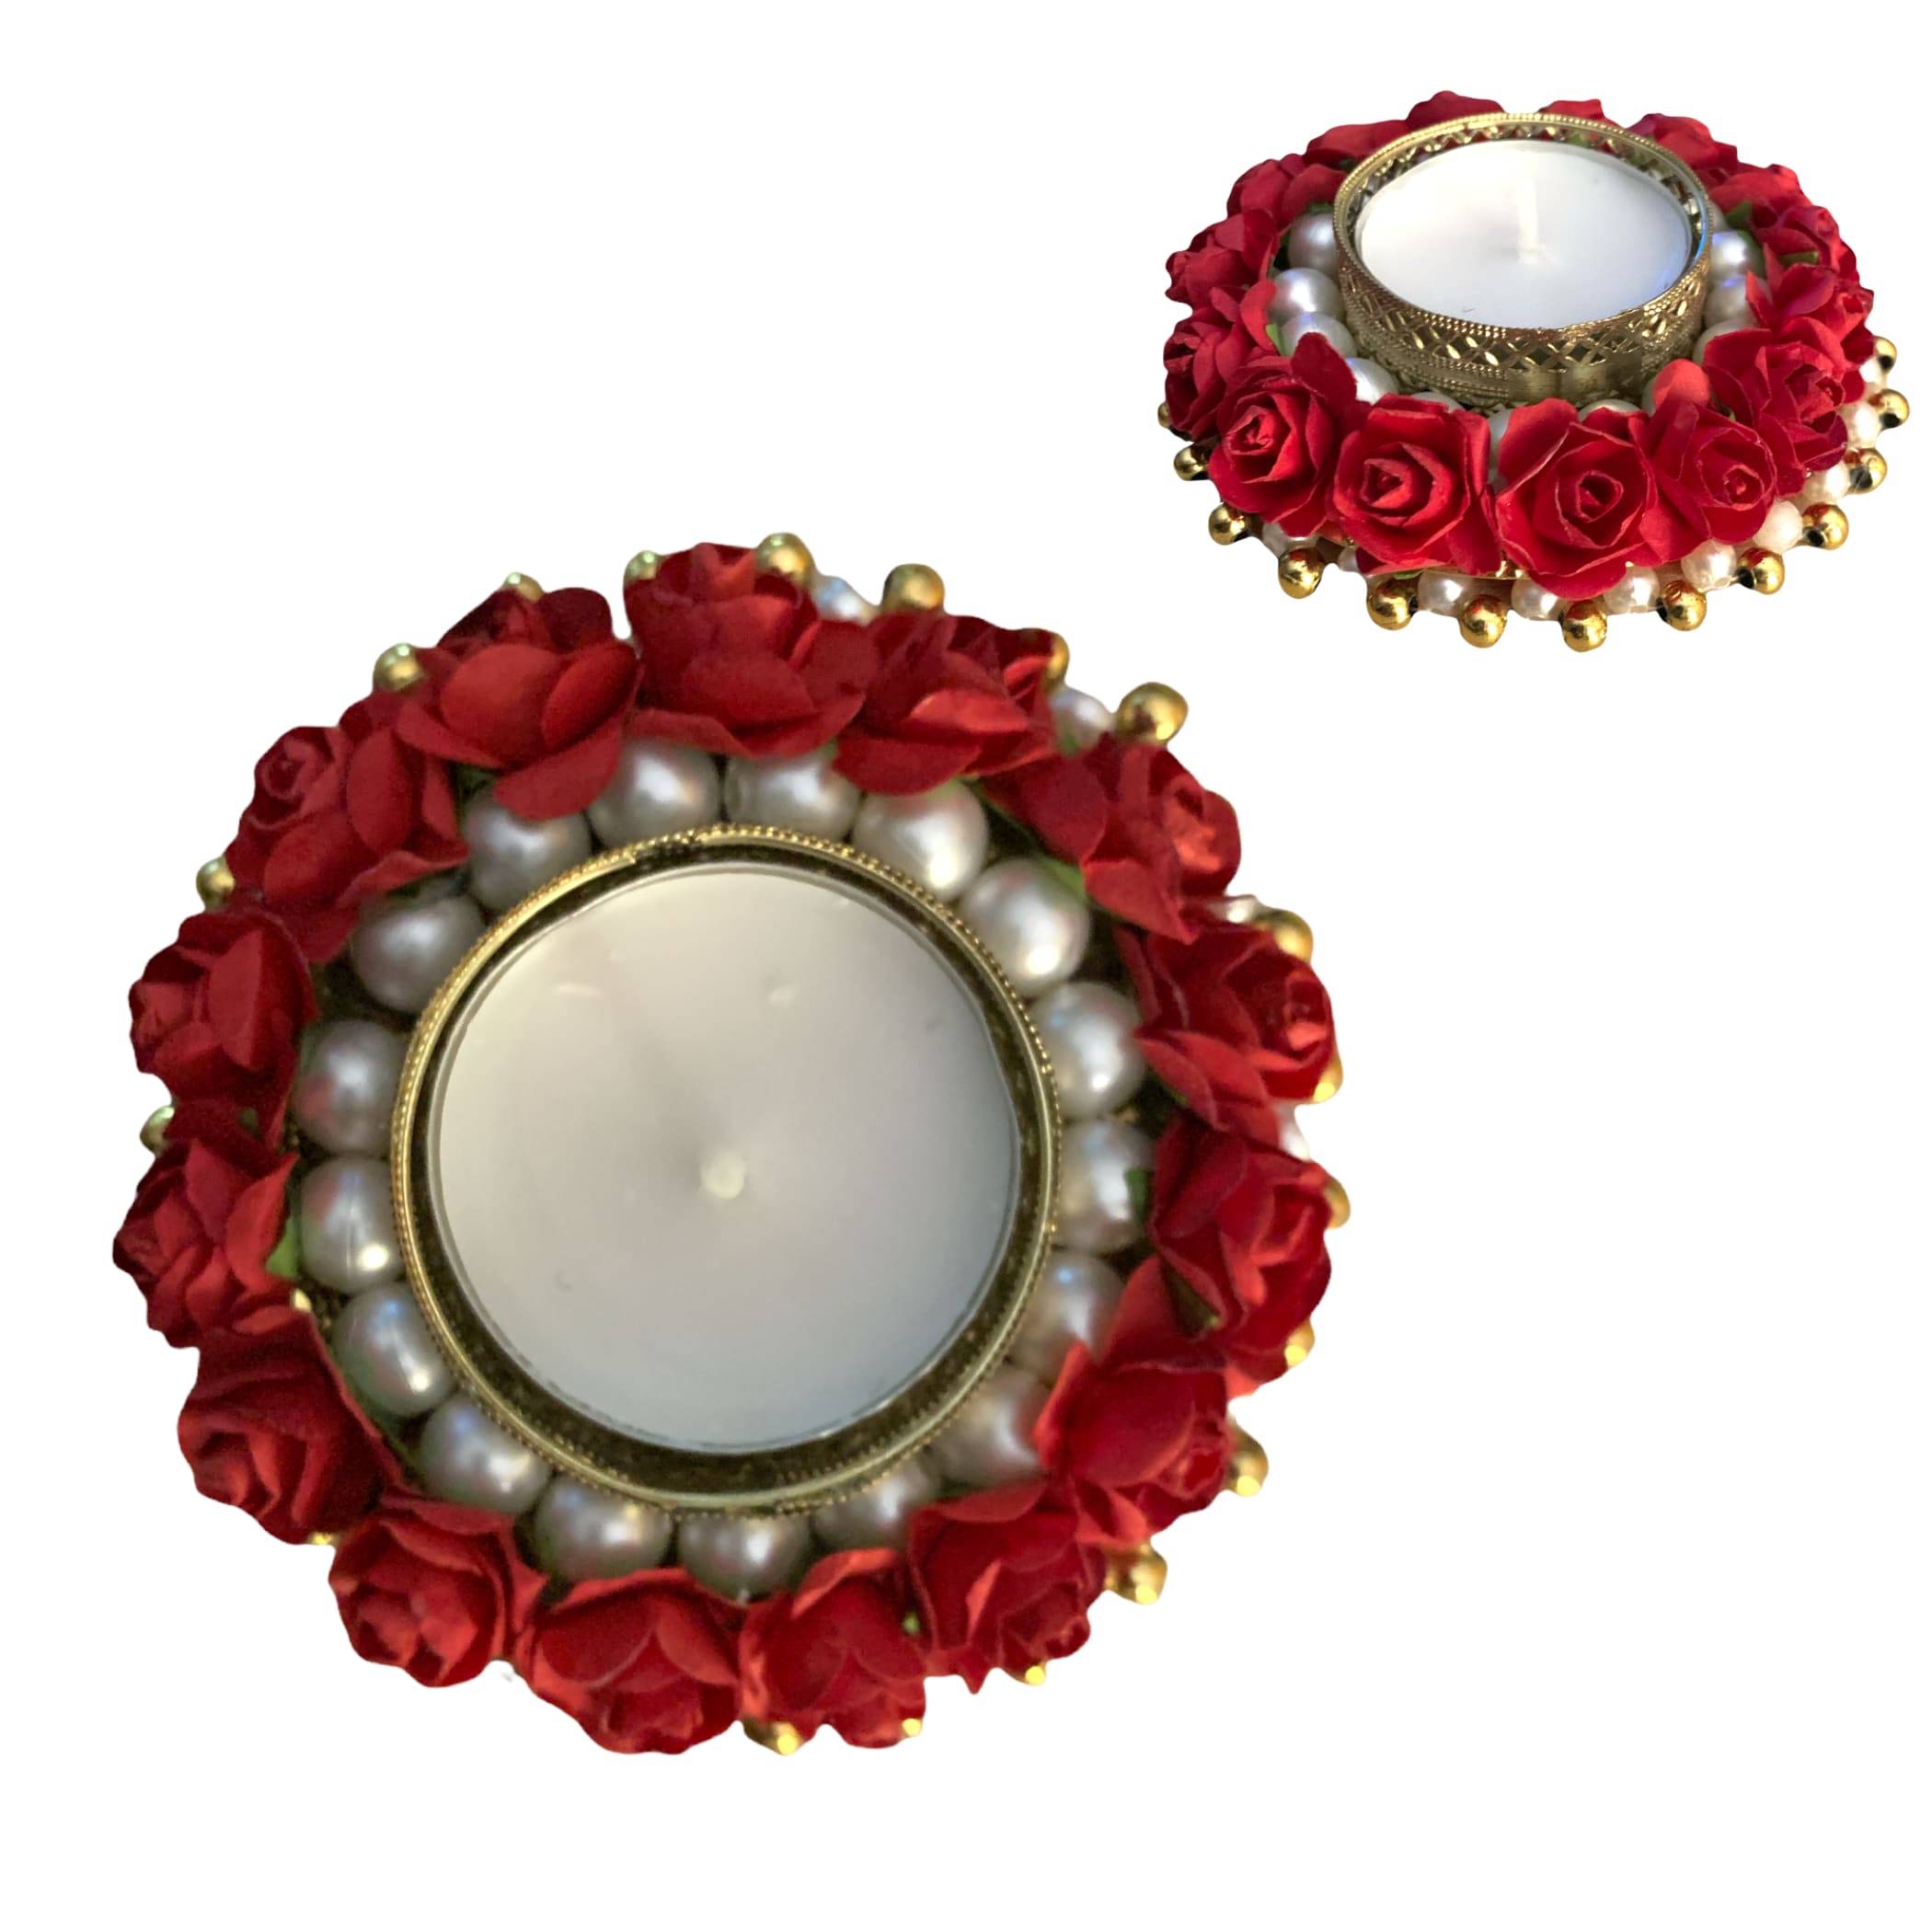 2 Ct Rose Tealight Candle Holders Diwali Decorations